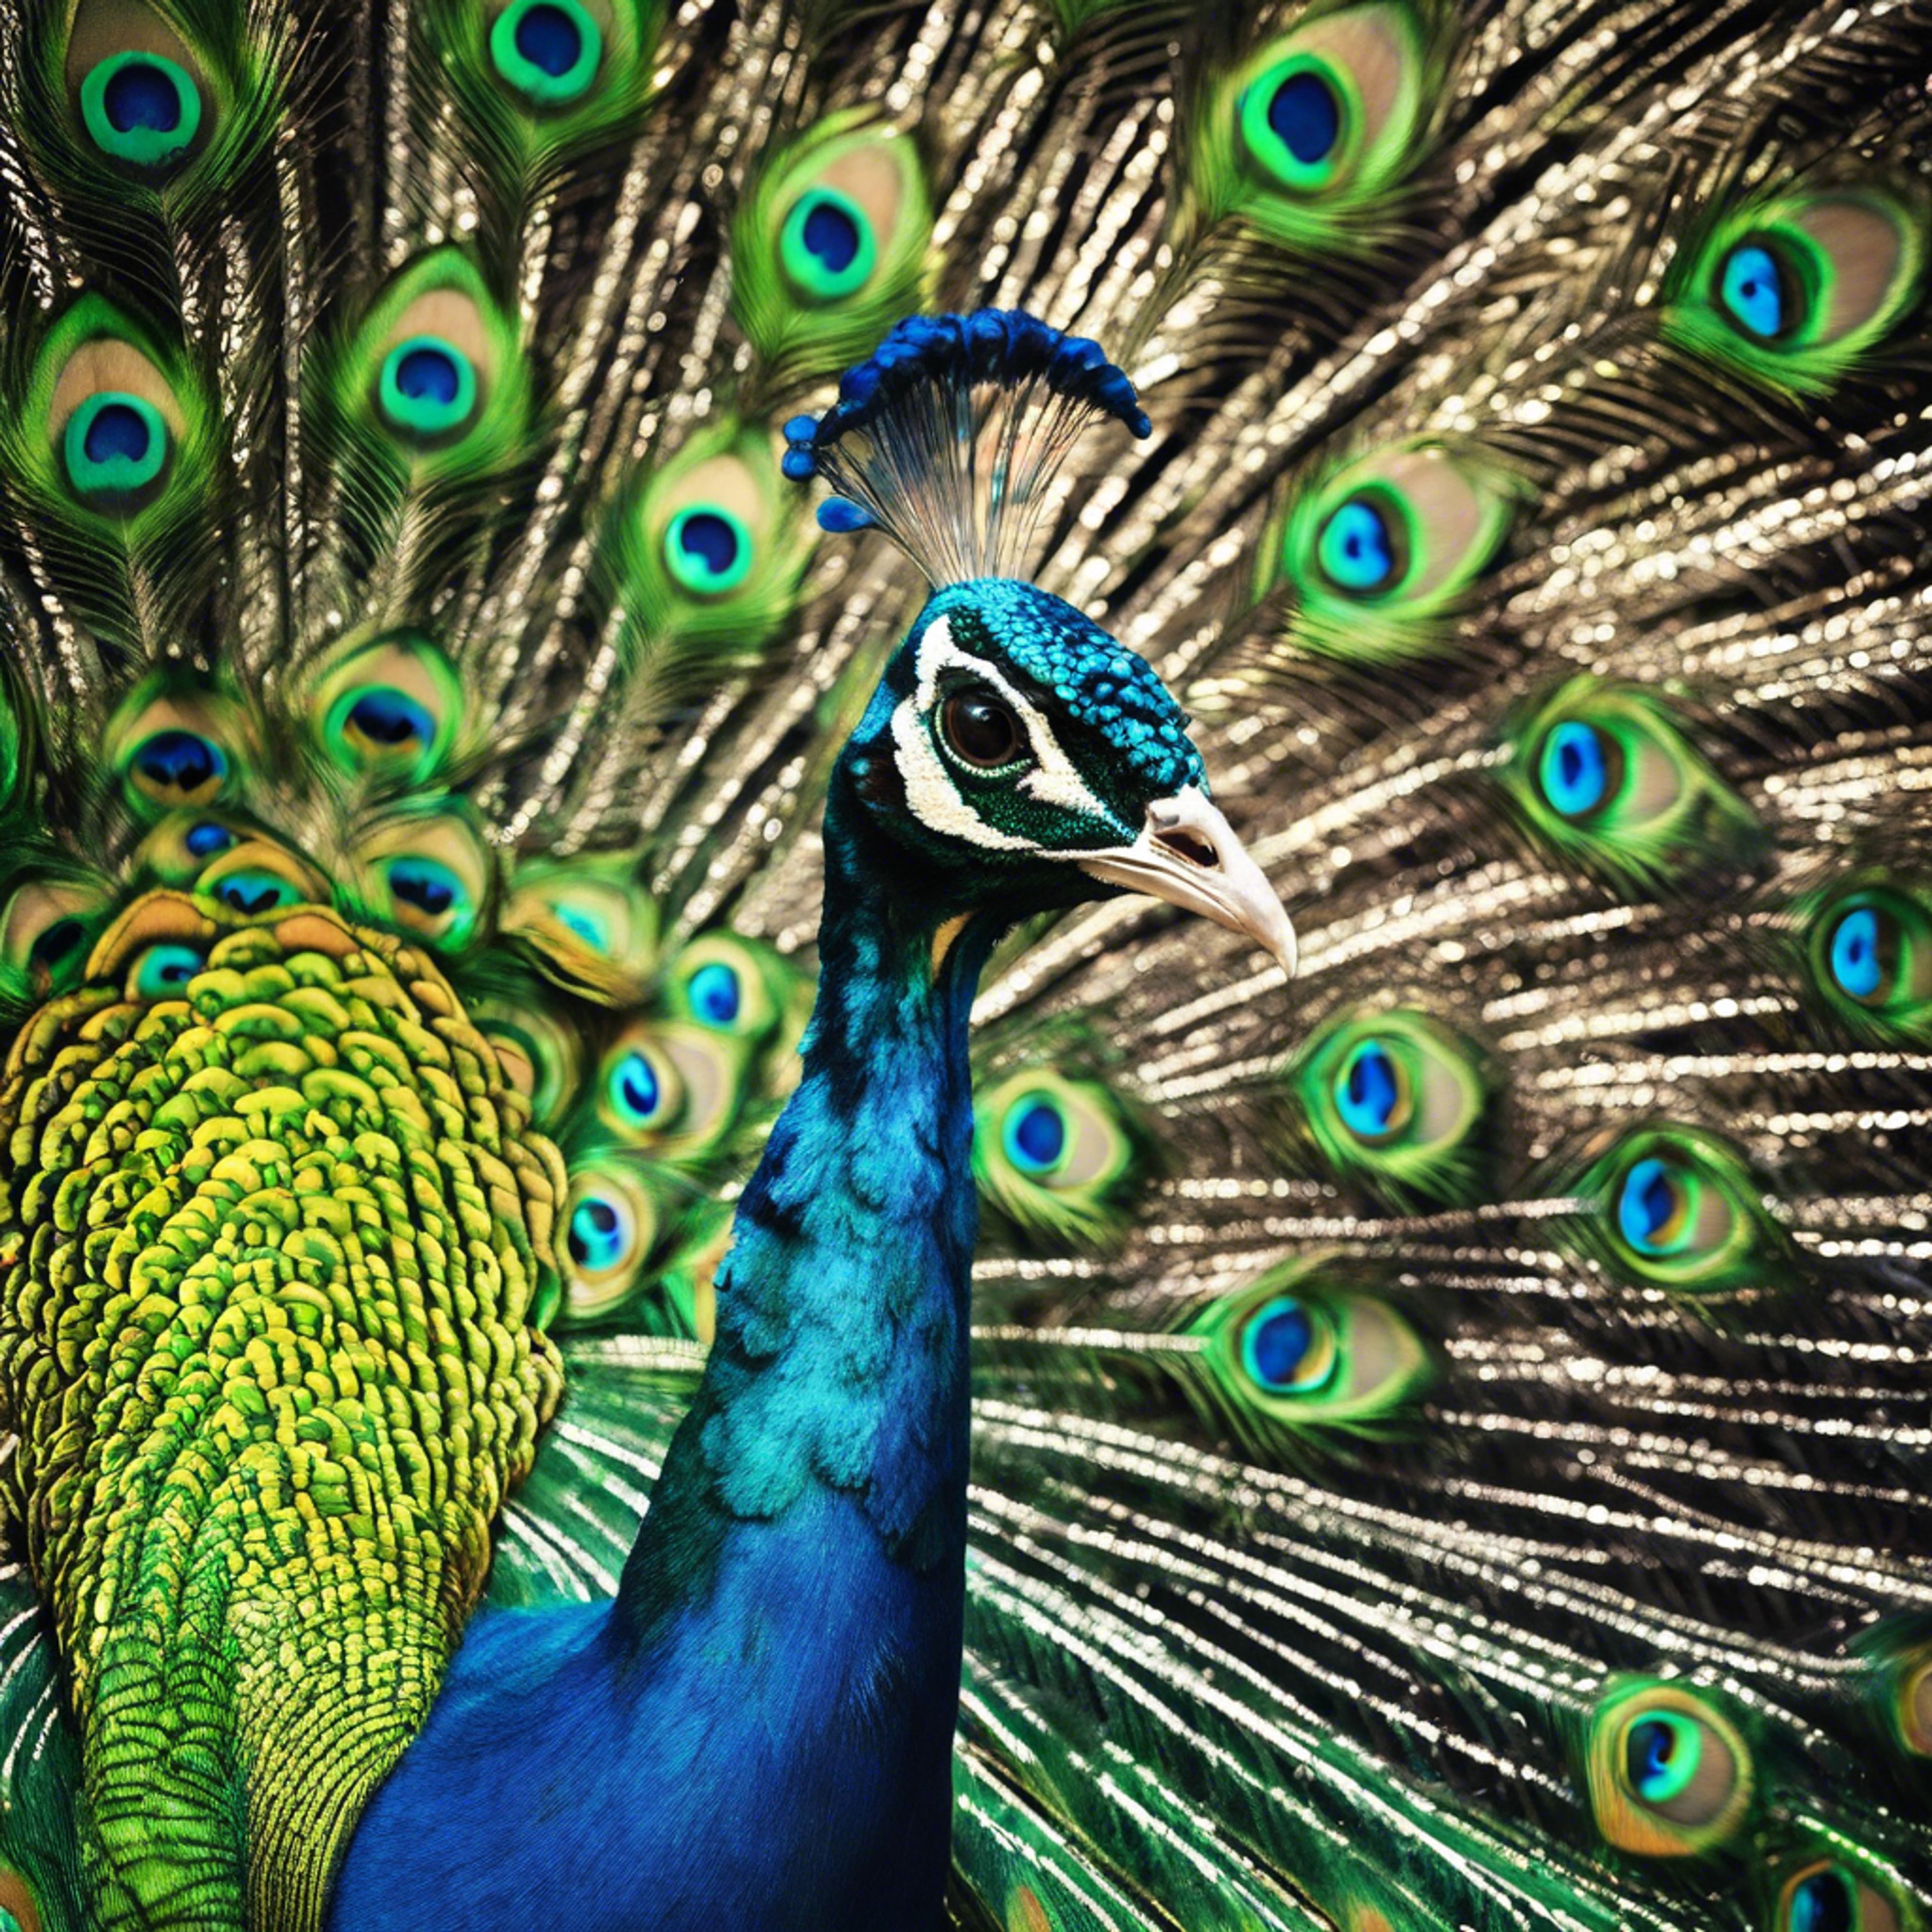 Abstract image of a princely peacock displaying its green iridescent feathers. Wallpaper[844e5cc4ee2c4bd78927]